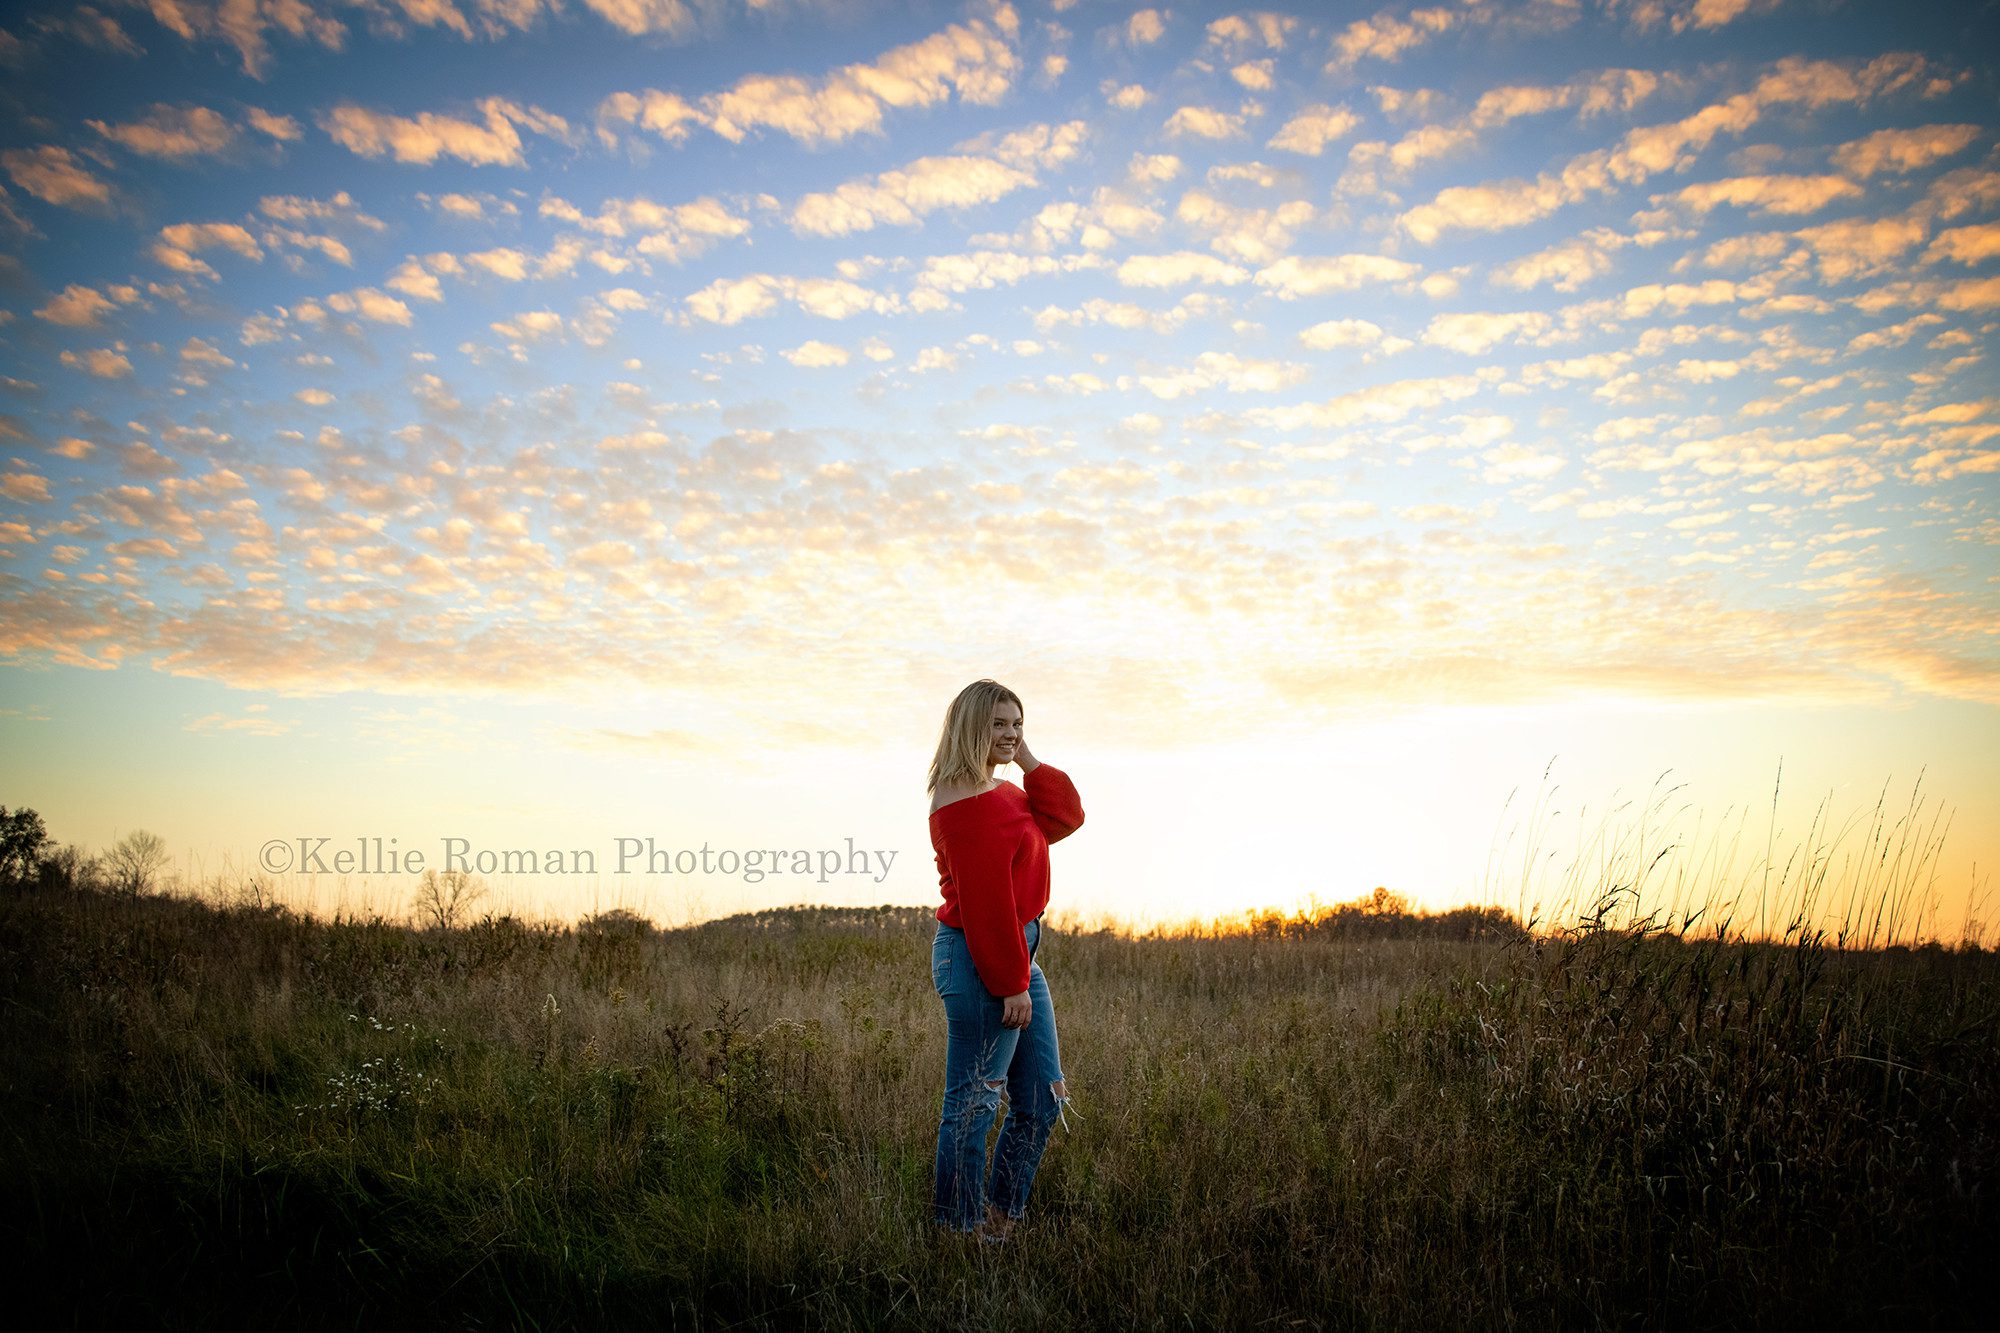 high school senior photographer a senior girl from kenosha is standing in a park in milwaukee county the park is a giant field of tall grass and the sun is setting behind her and the sky is glowing yellow with blues and little white clouds the senior girl is wearing a red sweater and jeans and has blonde hair